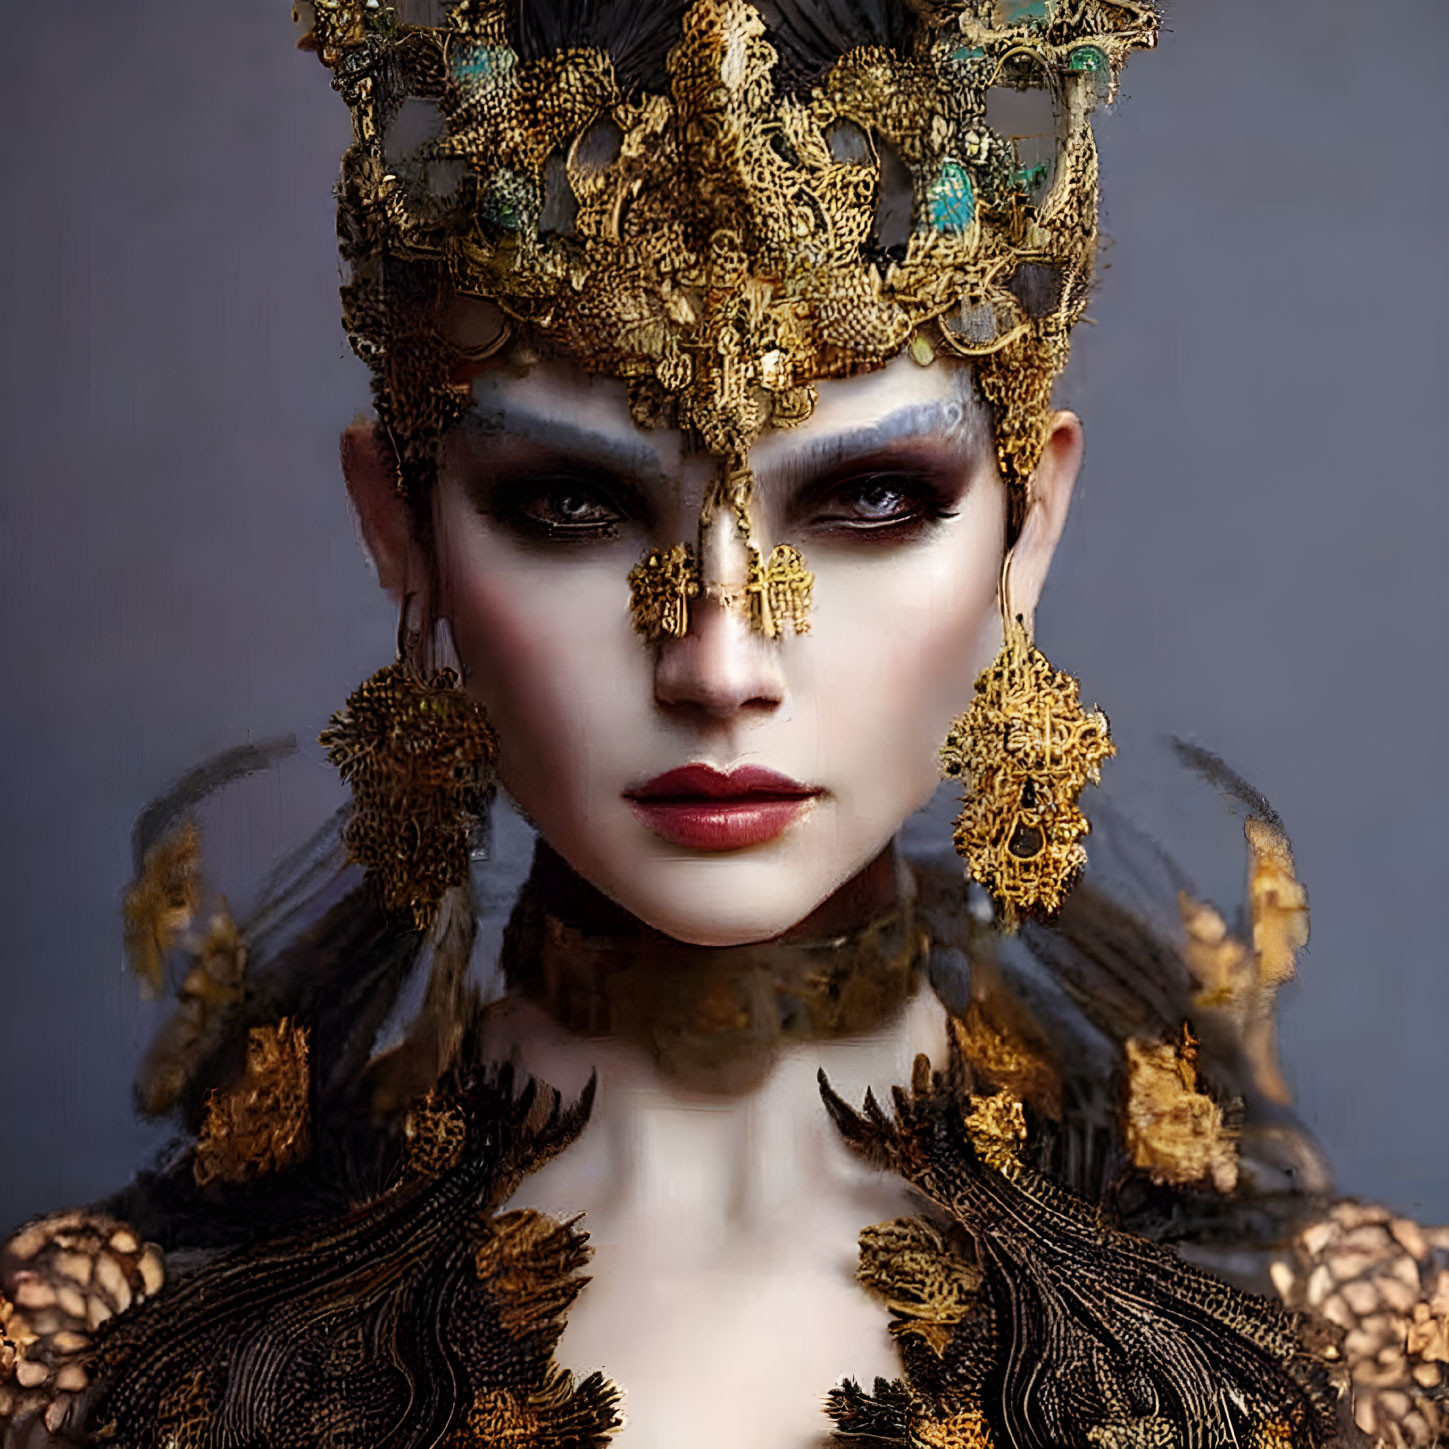 Woman in Ornate Golden Headdress, Matching Earrings, and Bold Makeup